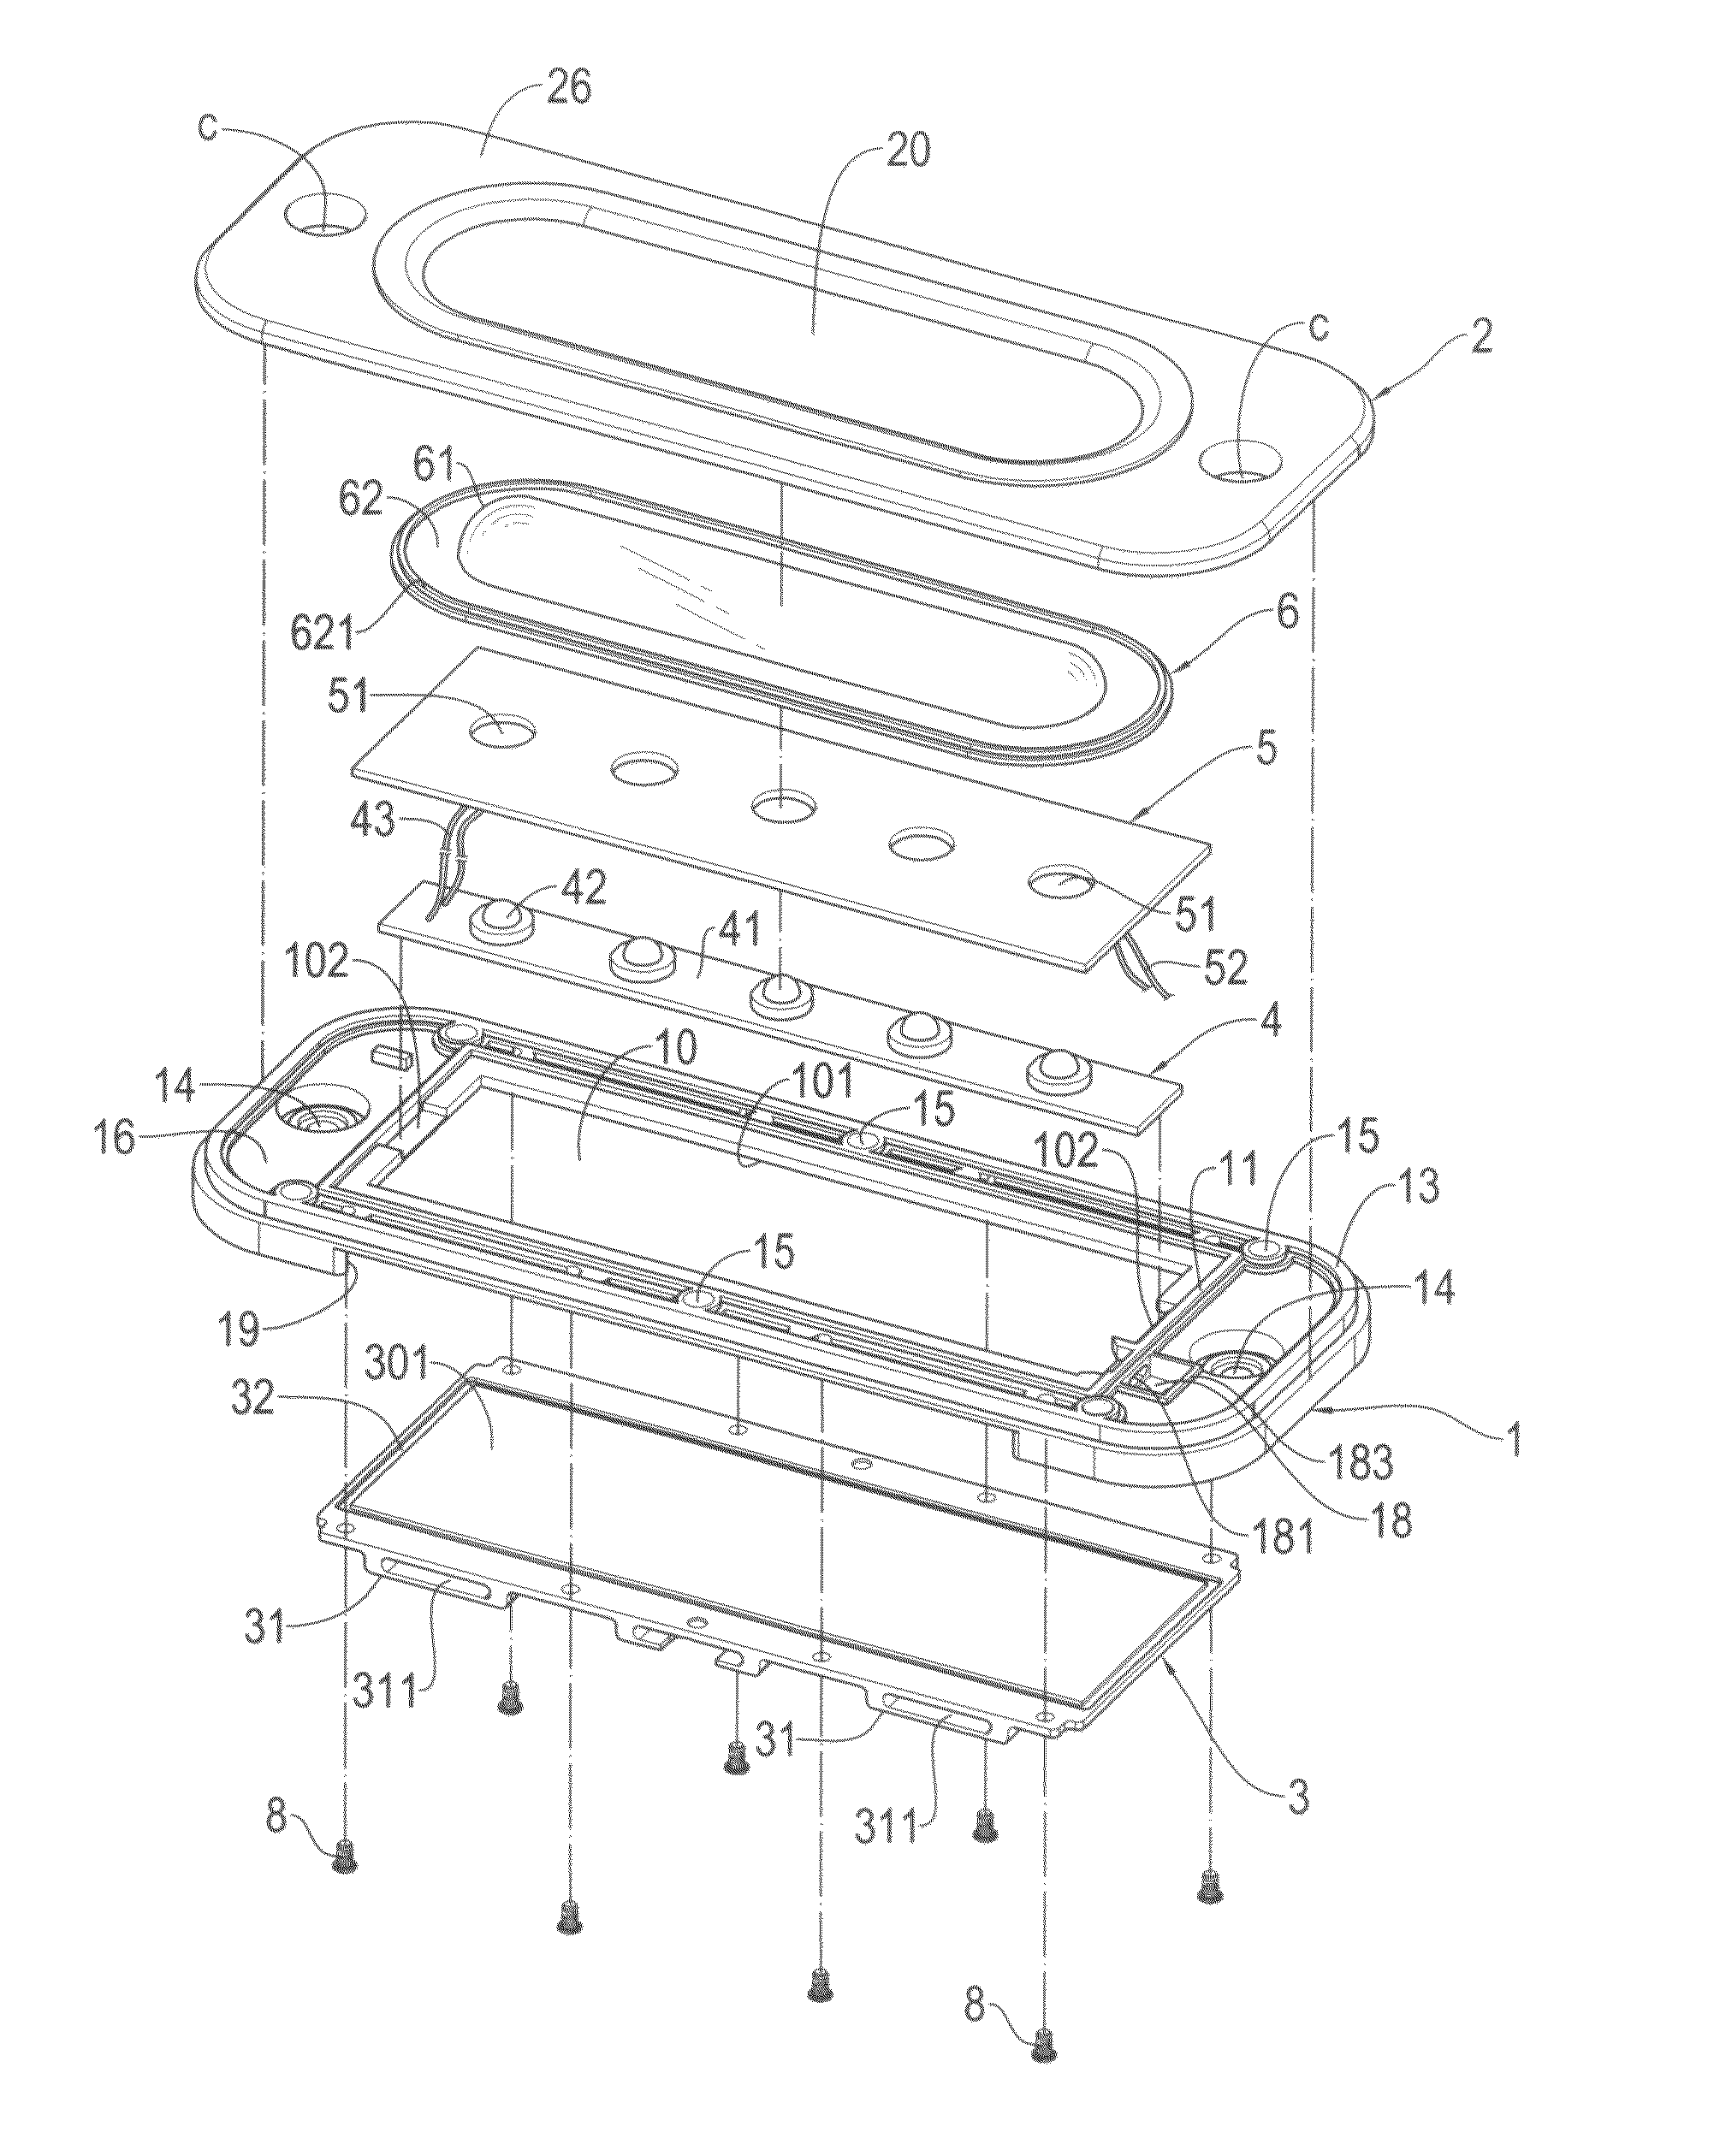 Low-profile light-emitting diode lamp structure